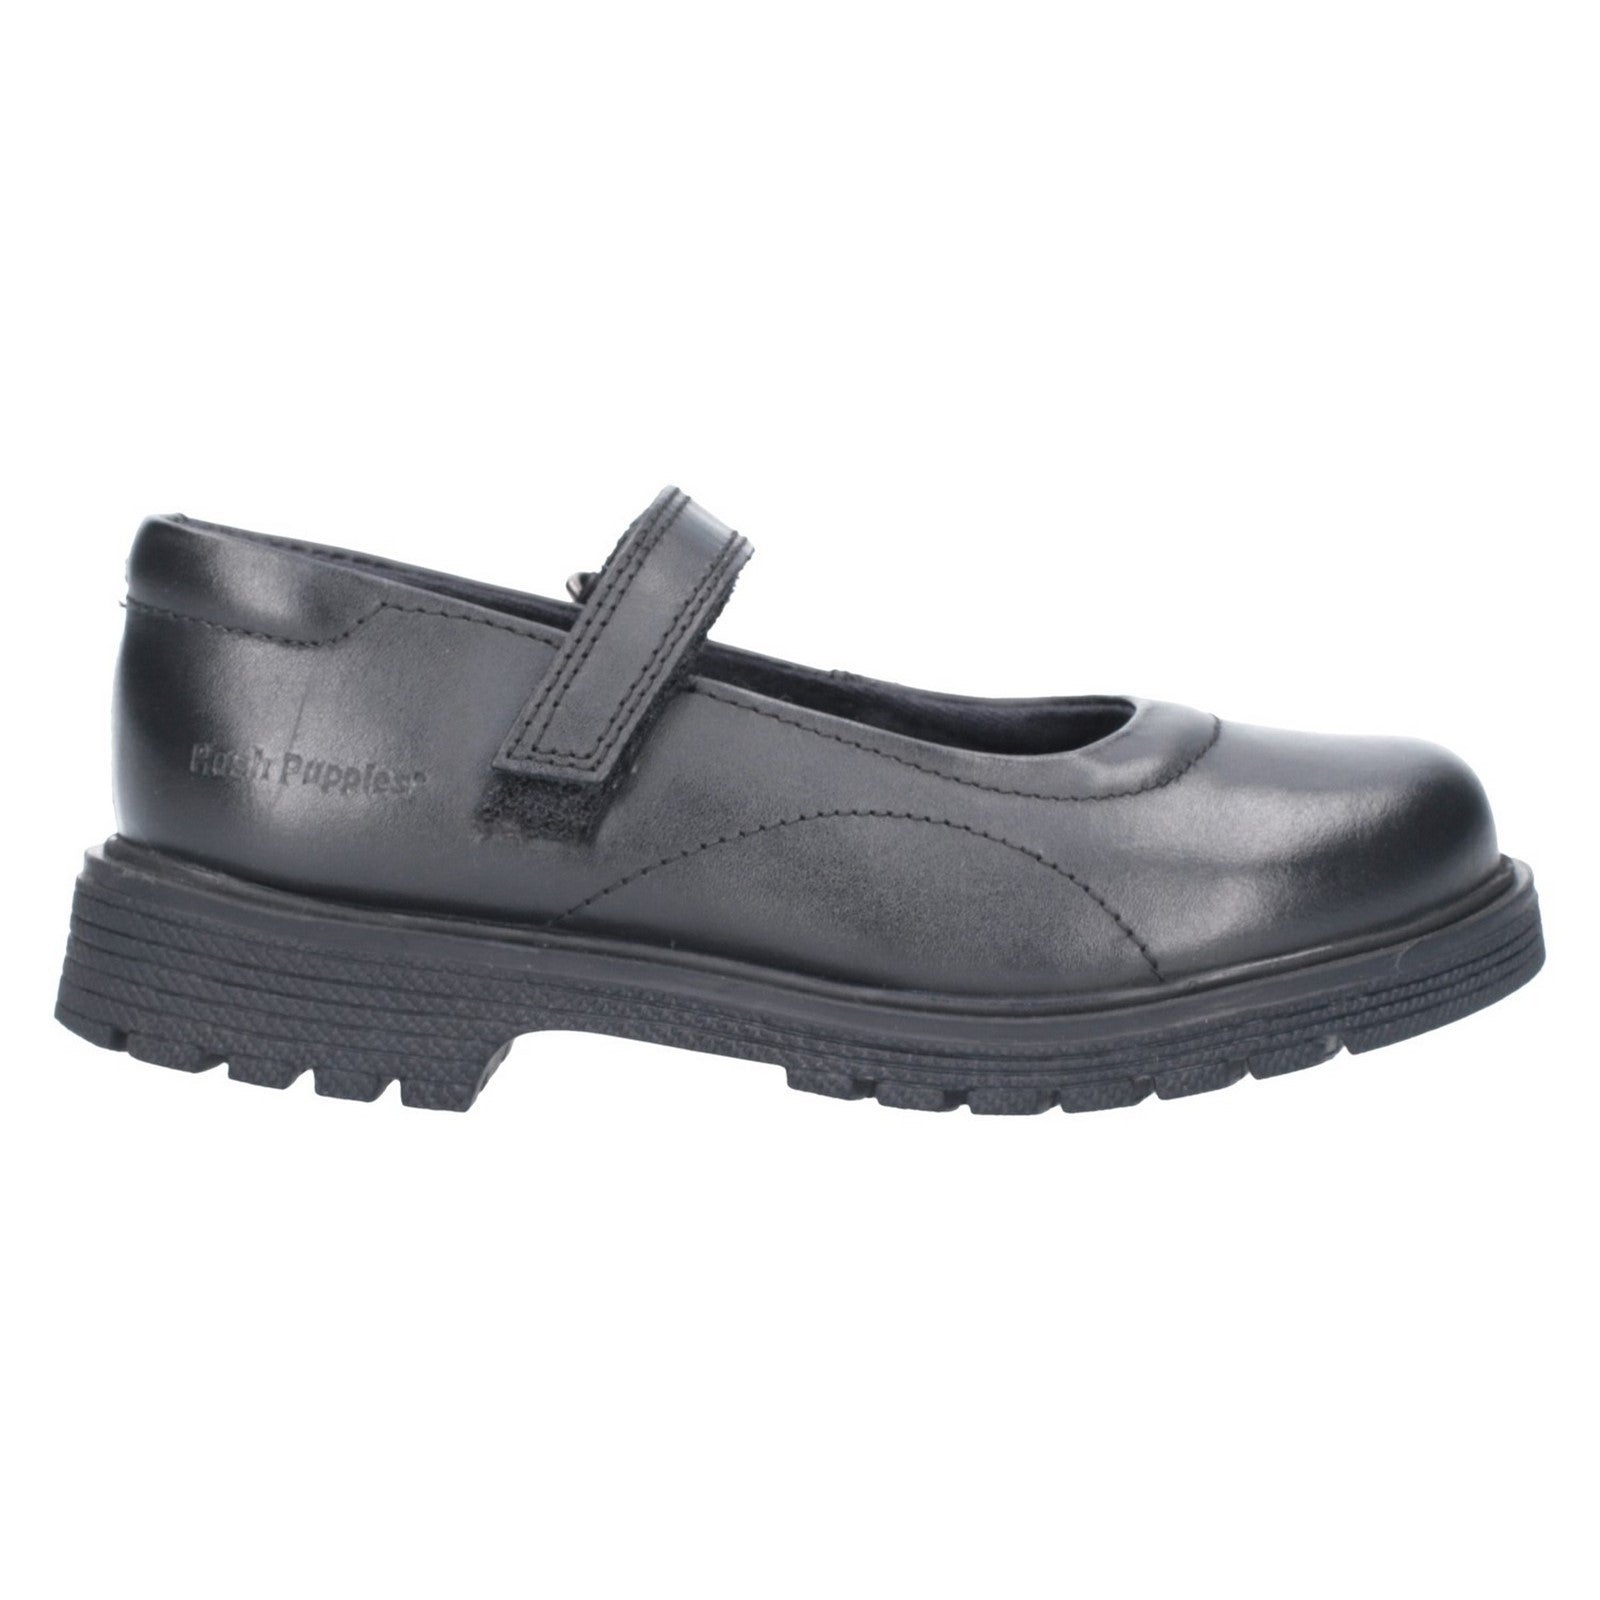 Hush Puppies Girls Tally Leather School Shoes - Black